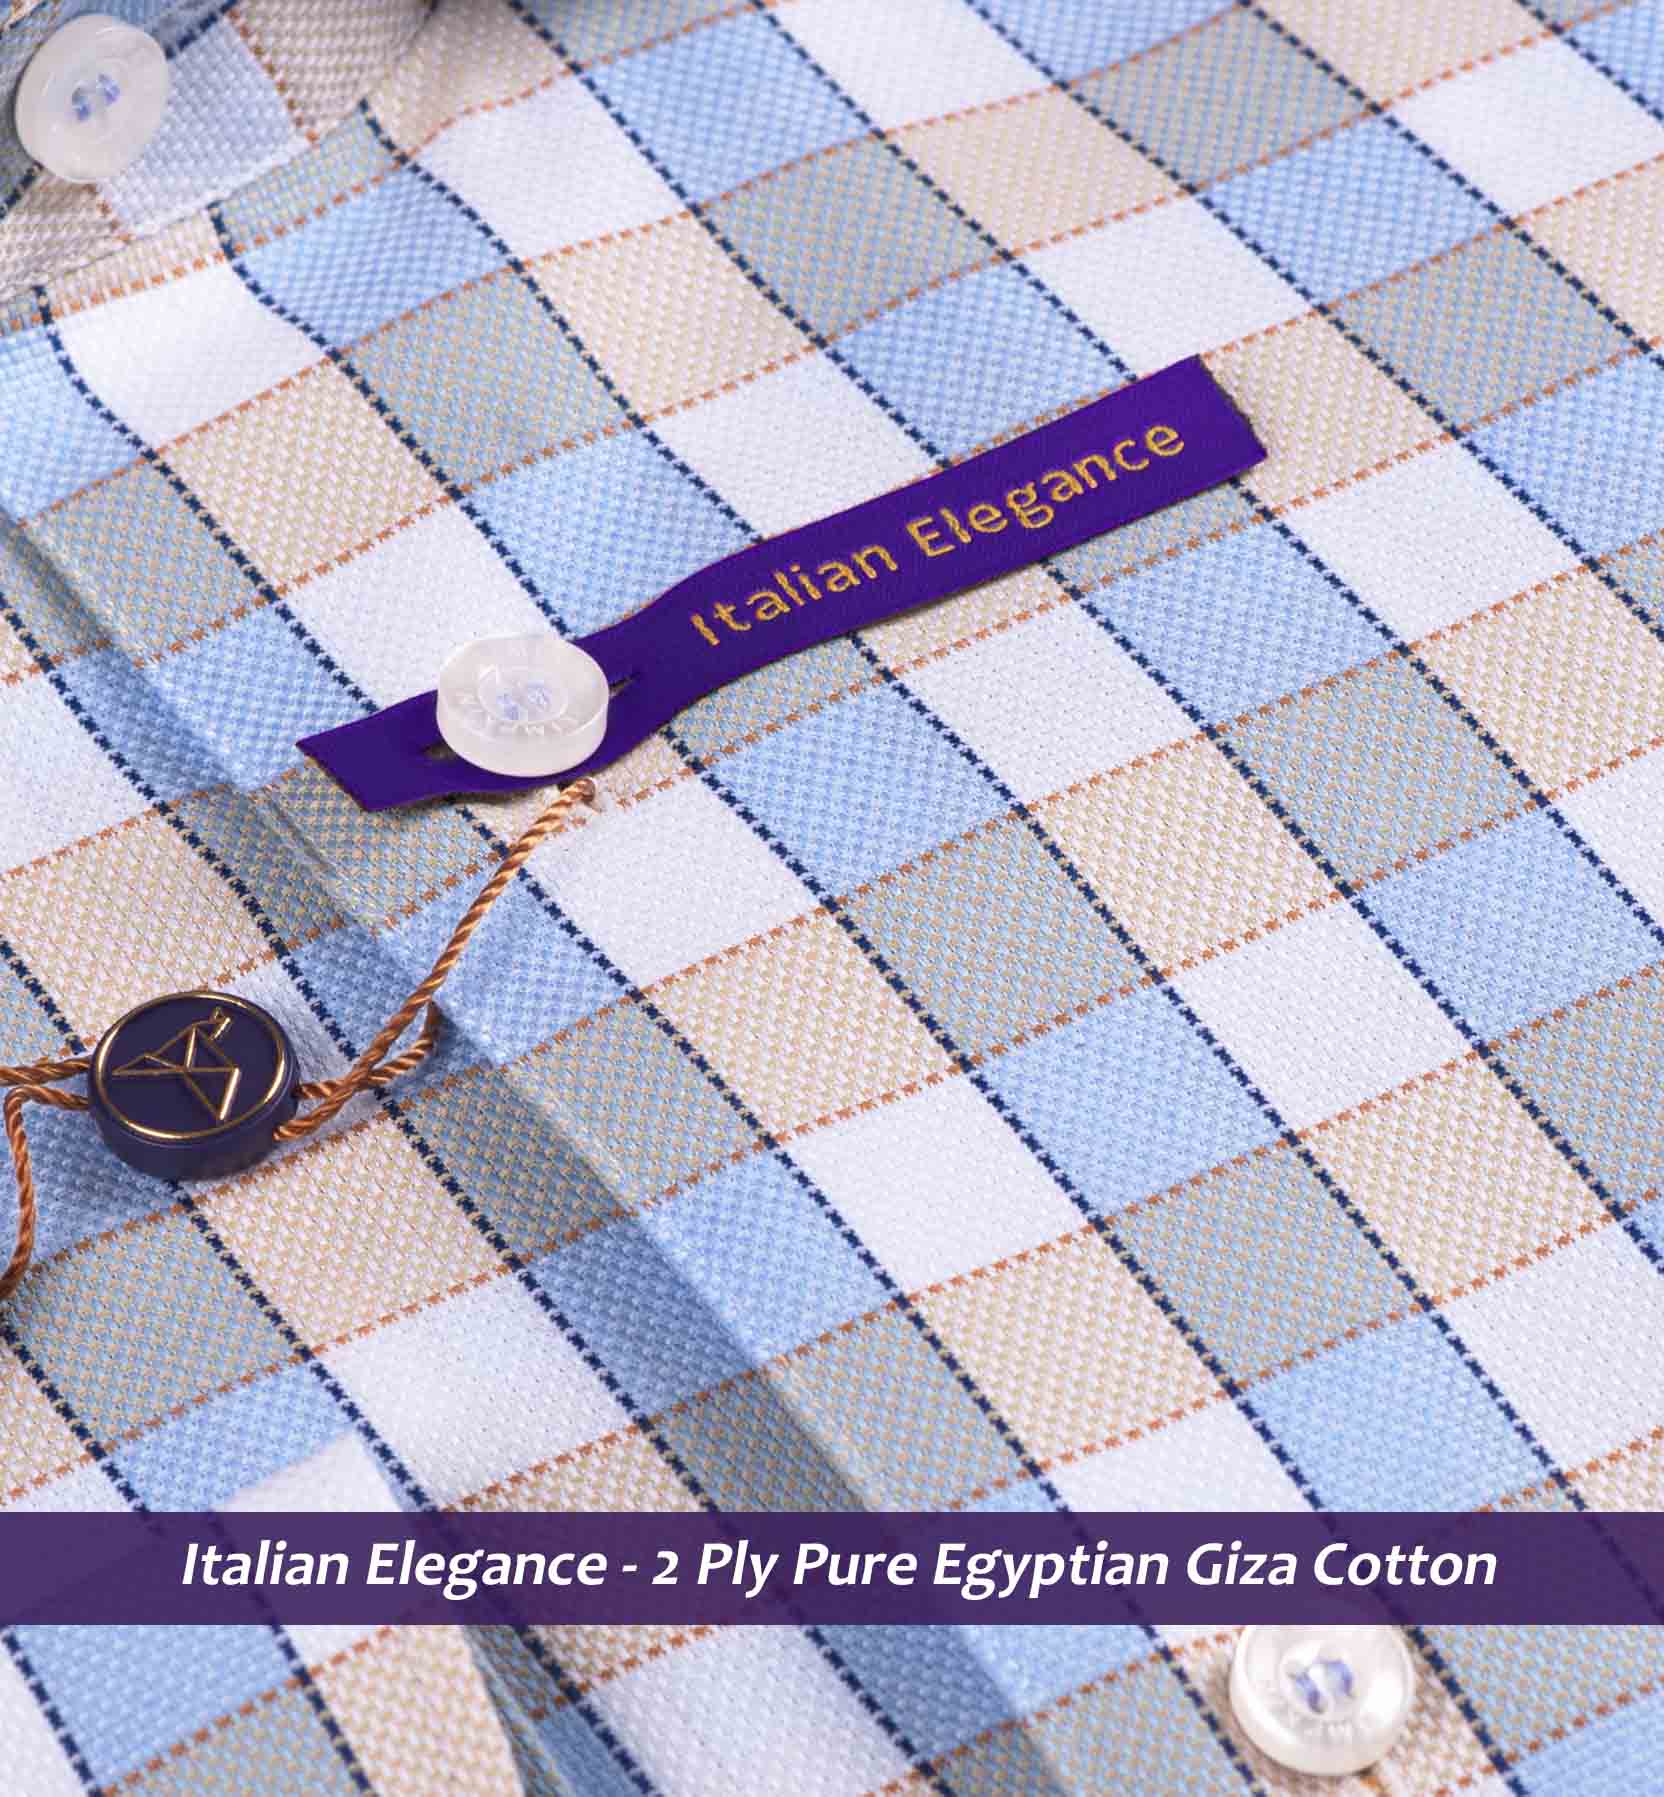 Oxford Blue & Beige Magical Check- 2 Ply Pure Egyptian Giza Cotton